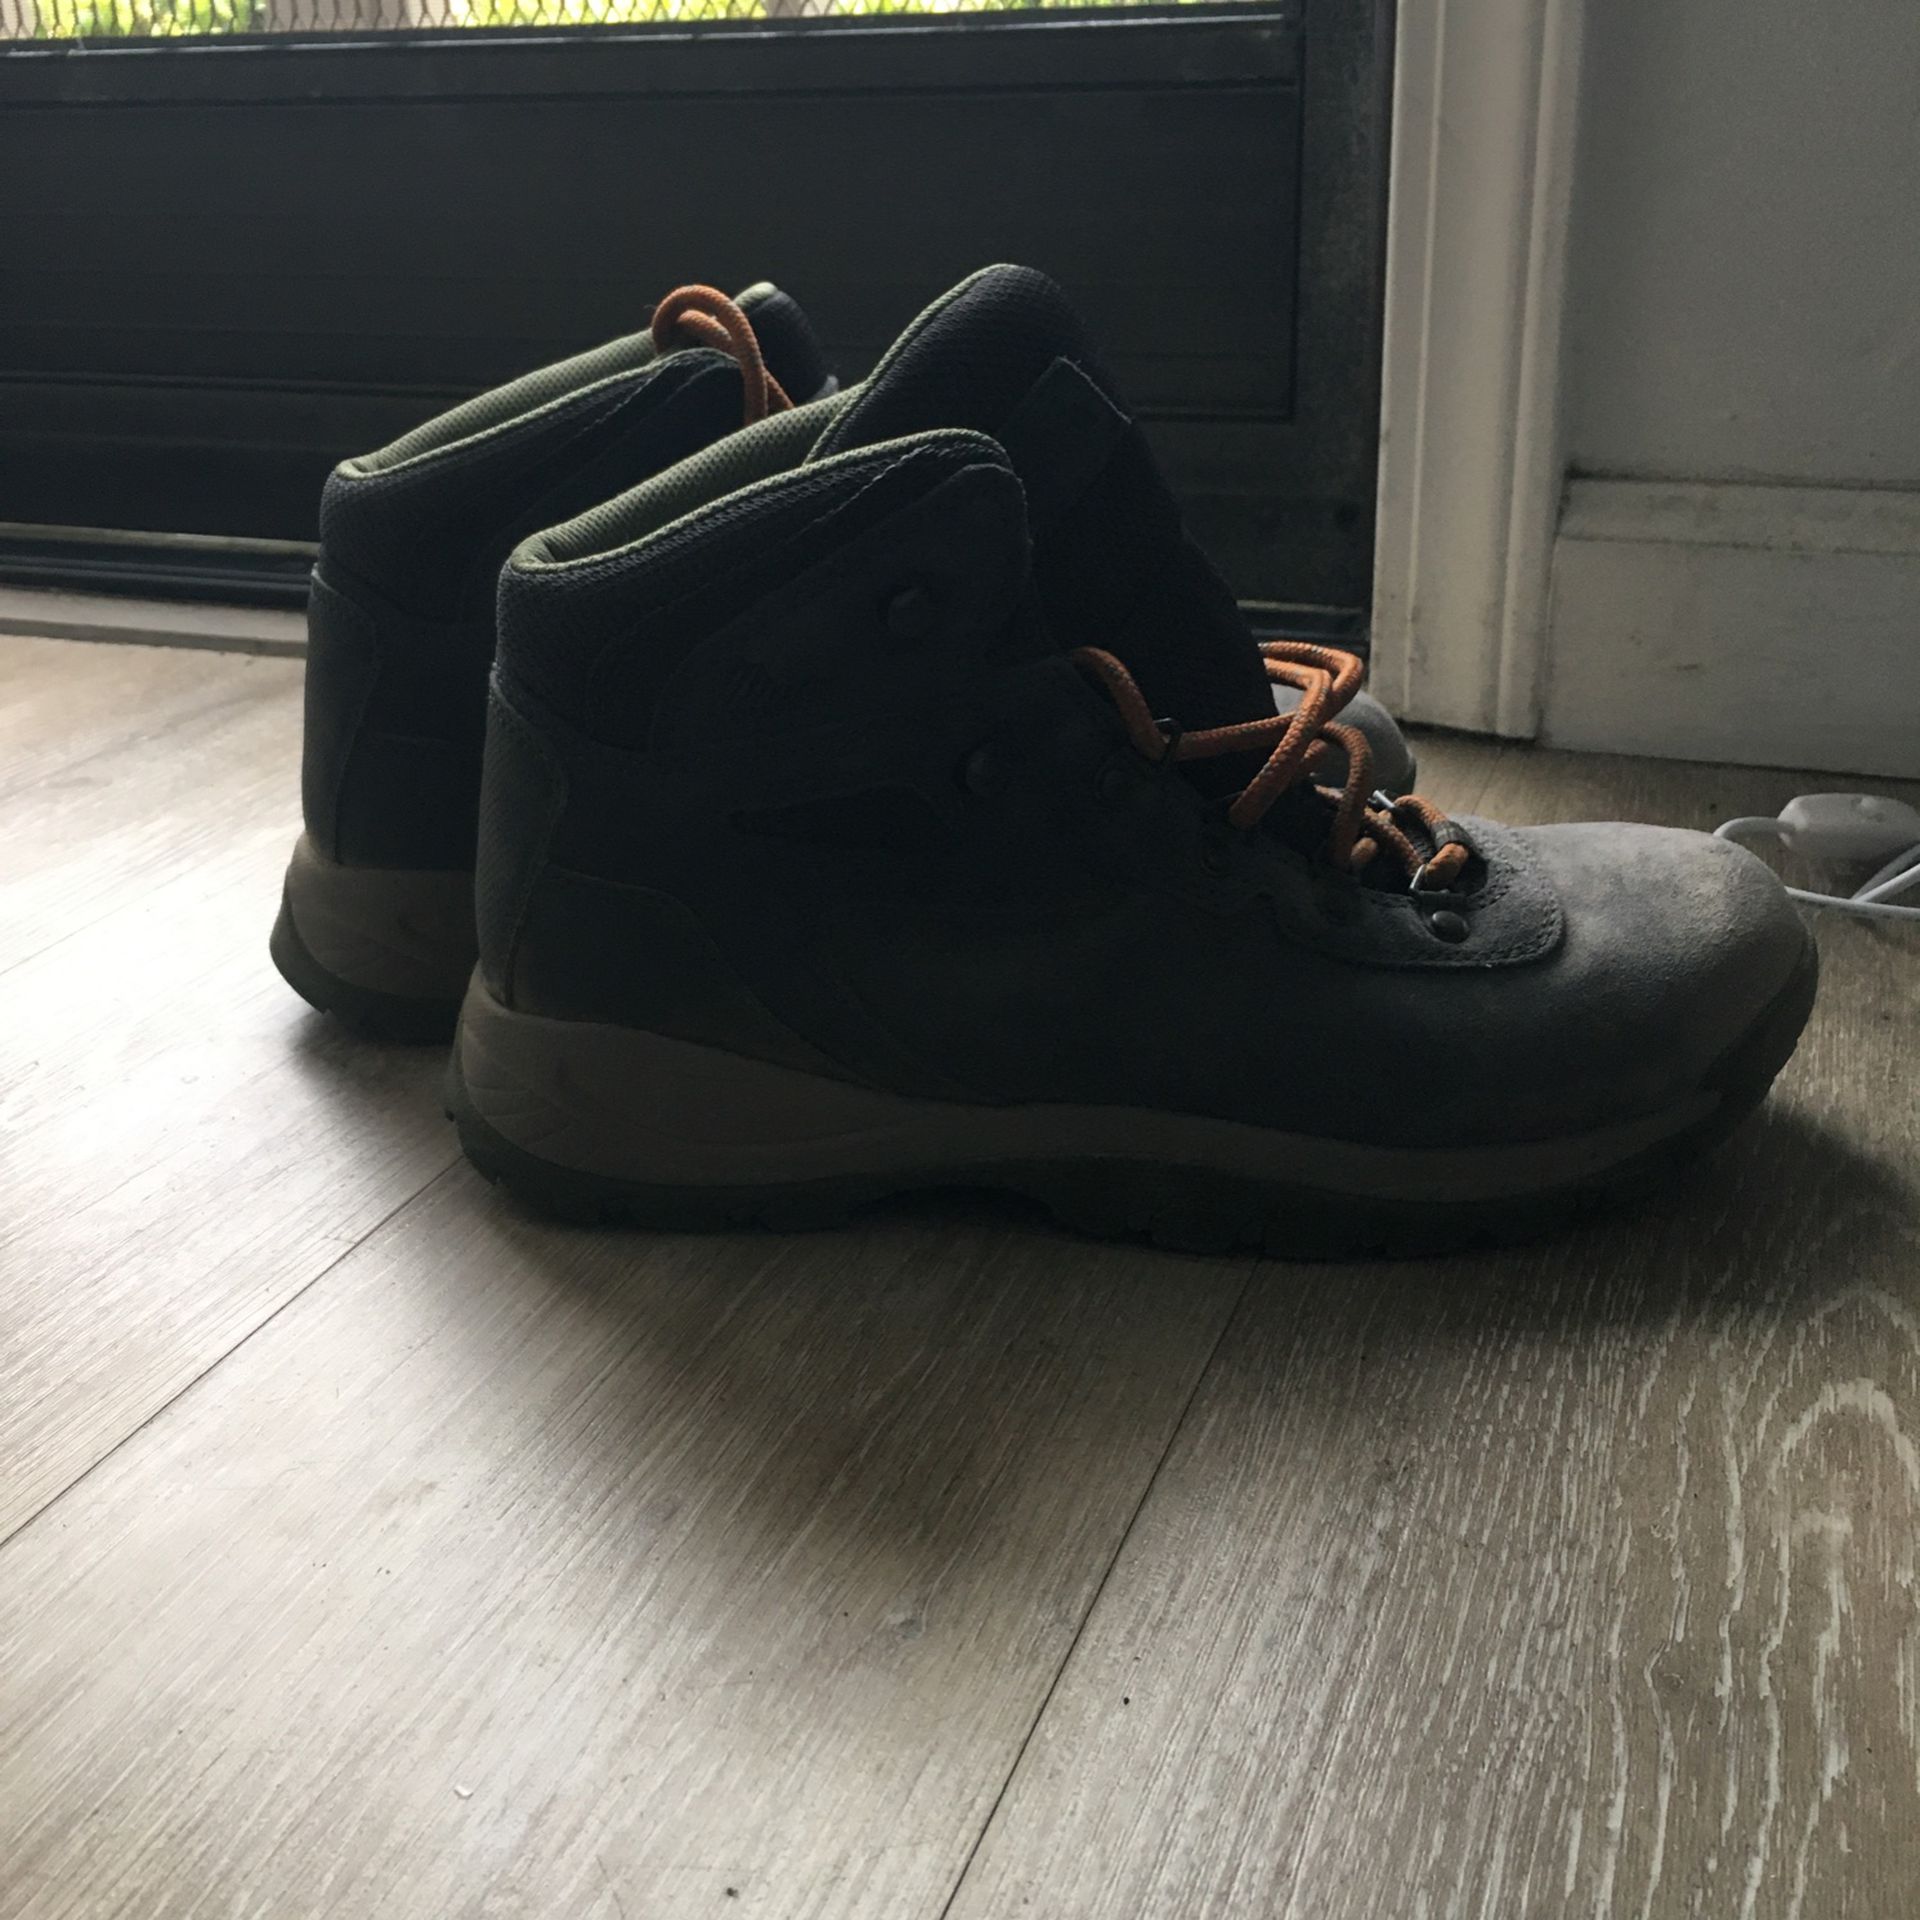 FREE - Women’s Columbia Hiking Boots Size 10.5